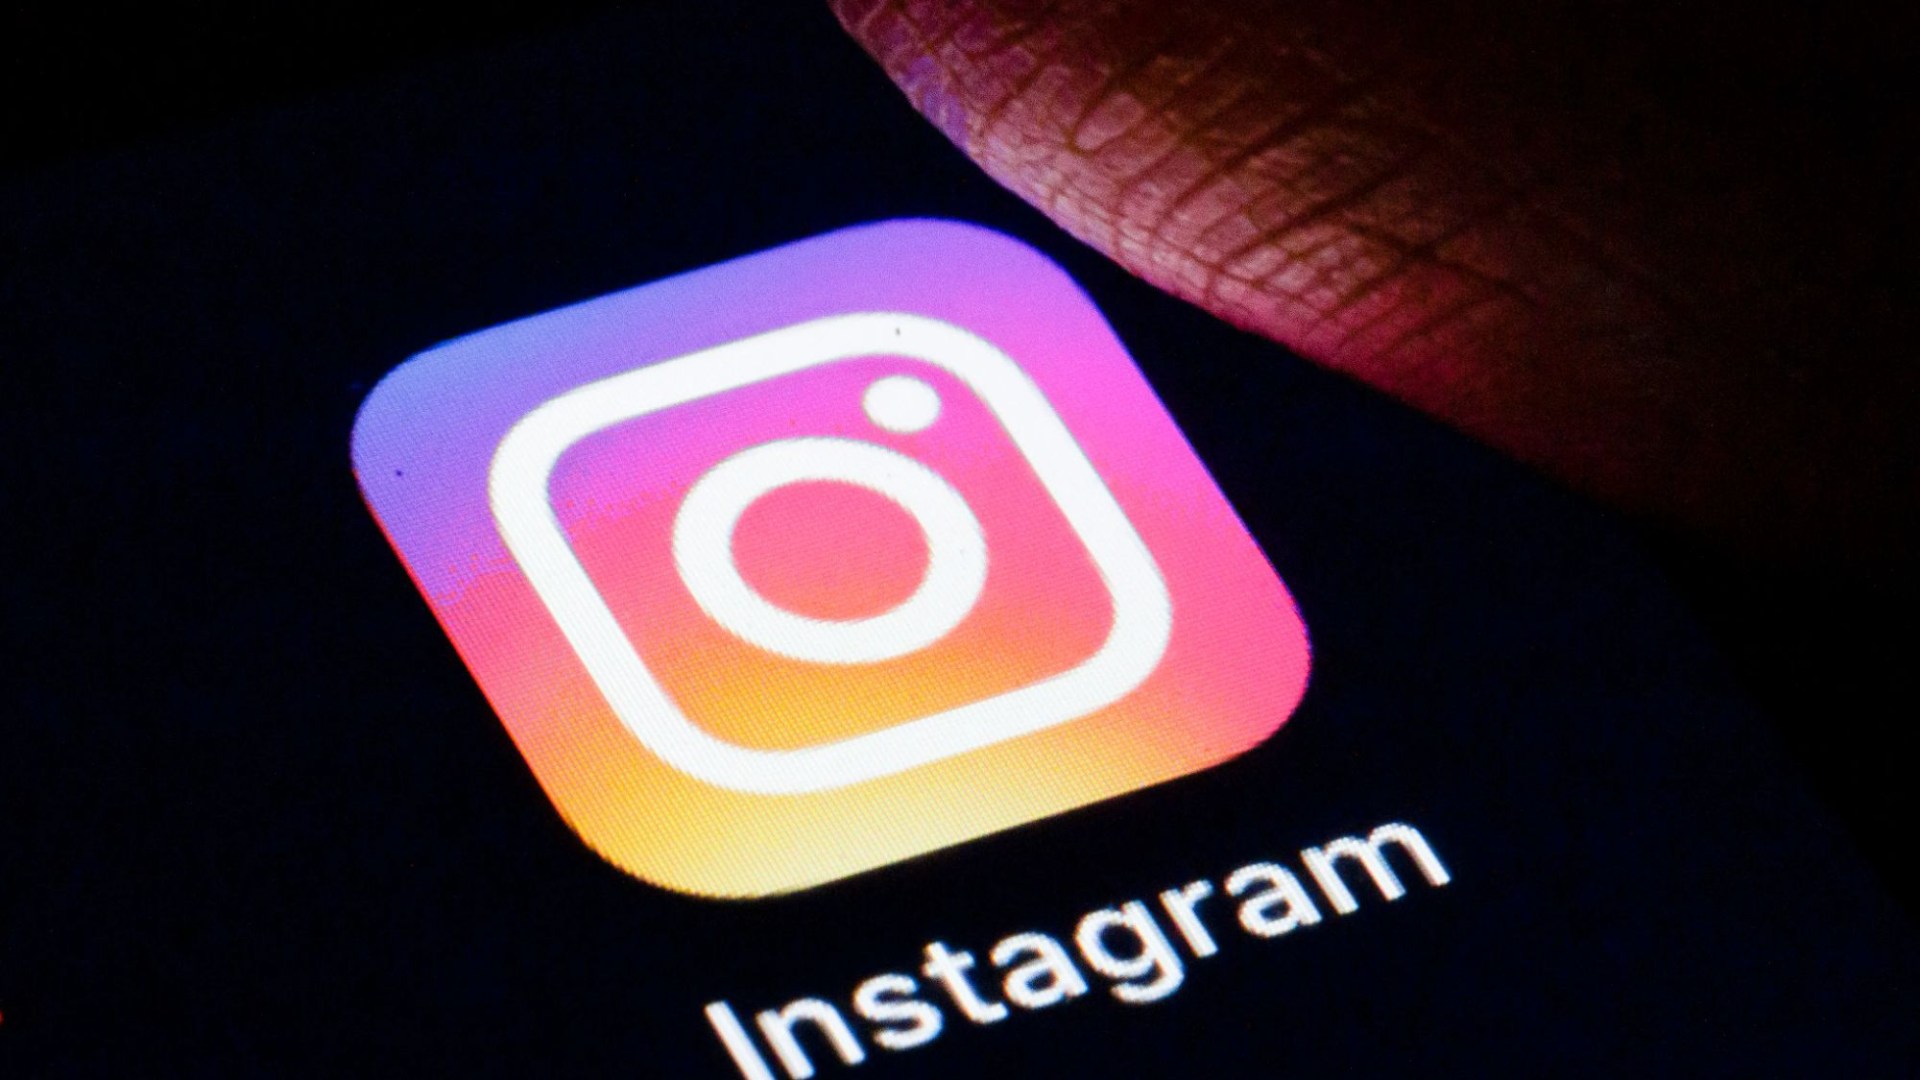 “Meta’s Instagram Down: Thousands of Users Report App Outages” – Stay informed on the latest issues affecting the popular social media platform.